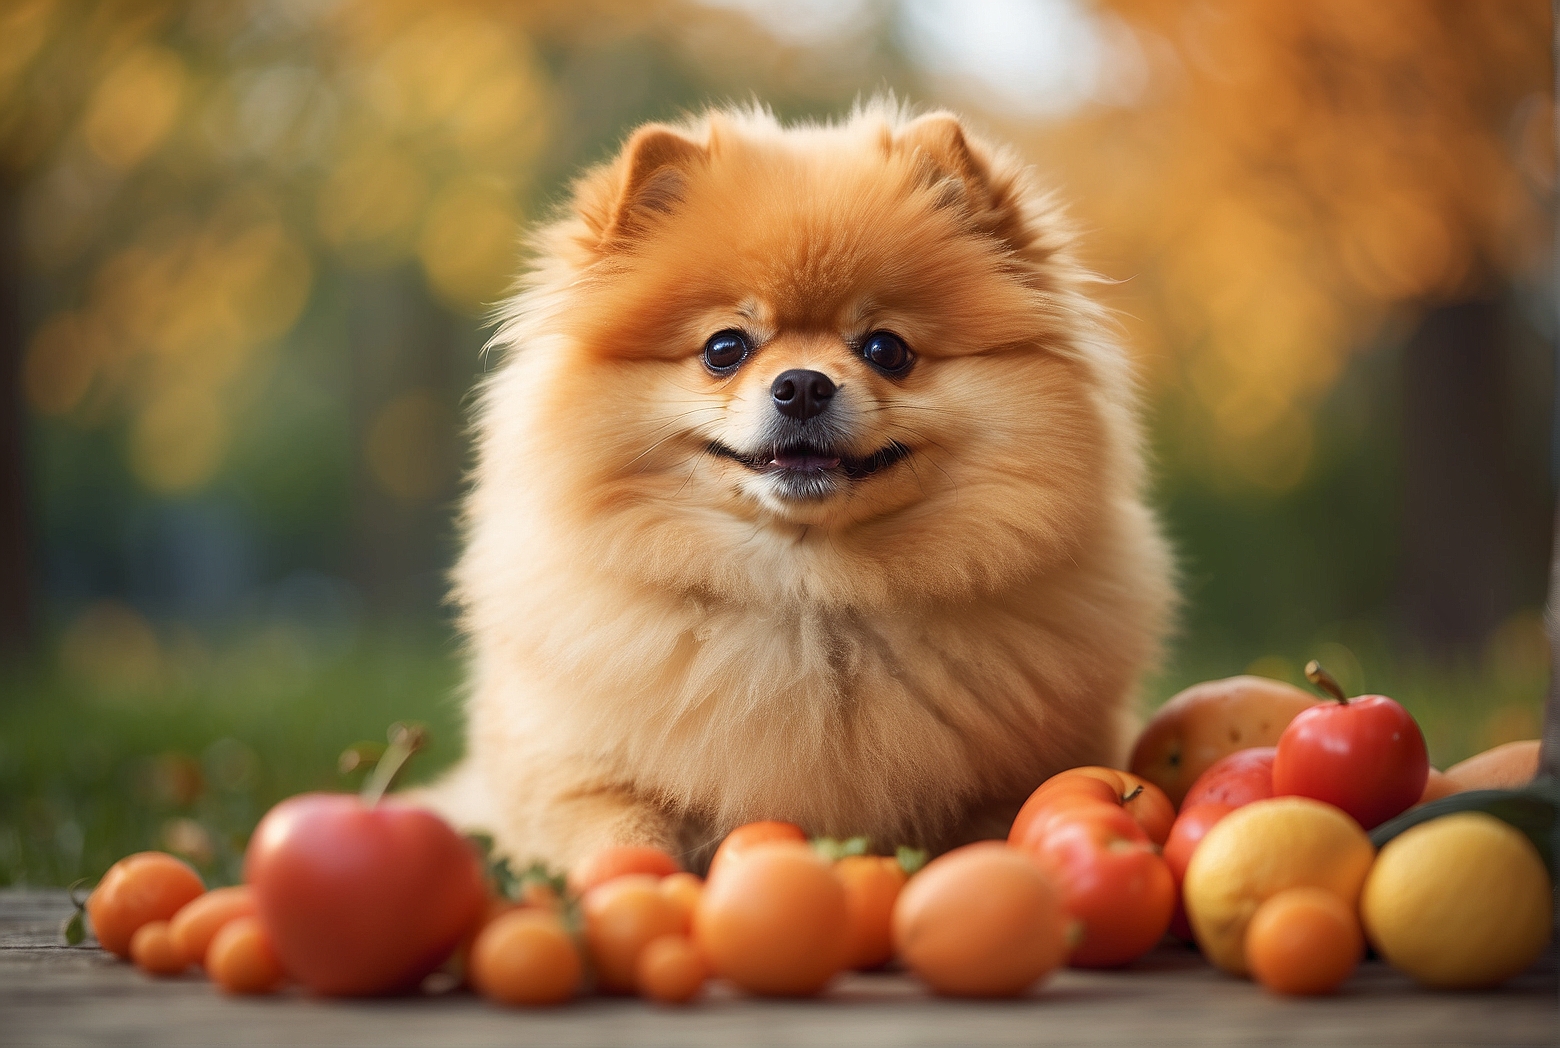 Healthy Diet for Overweight Pomeranians